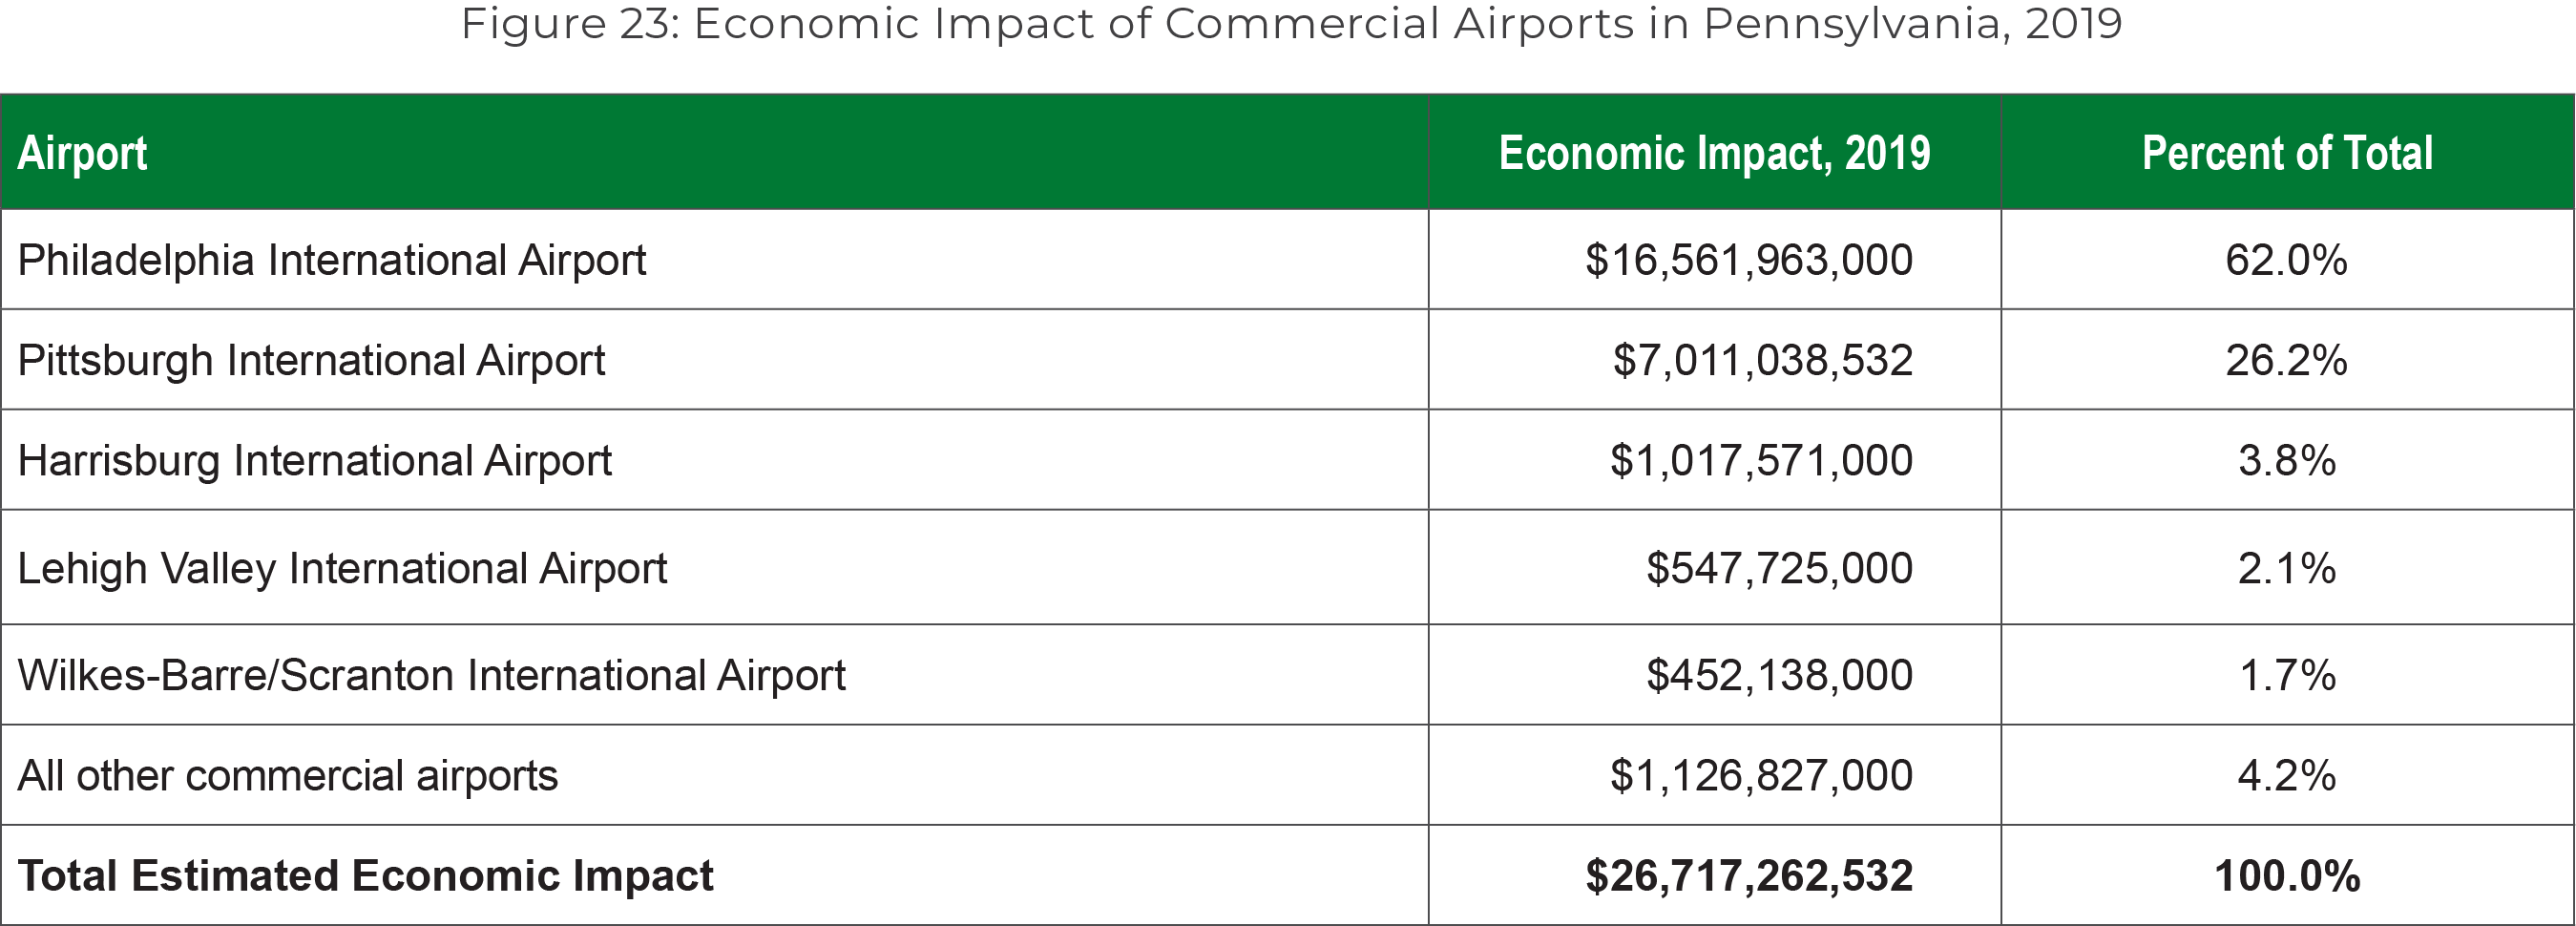 Chart with the following economic impact data for 2019:
                                                        Philadelphia International Airport $16,561,963,000 62.0%
                                                        Pittsburgh International Airport $7,011,038,532 26.2%
                                                        Harrisburg International Airport $1,017,571,000 3.8%
                                                        Lehigh Valley International Airport $547,725,000 2.1%
                                                        Wilkes-Barre/Scranton International Airport $452,138,000 1.7%
                                                        All other commercial airports $1,126,827,000 4.2%
                                                        Total Estimated Economic Impact $26,717,262,532 100.0%